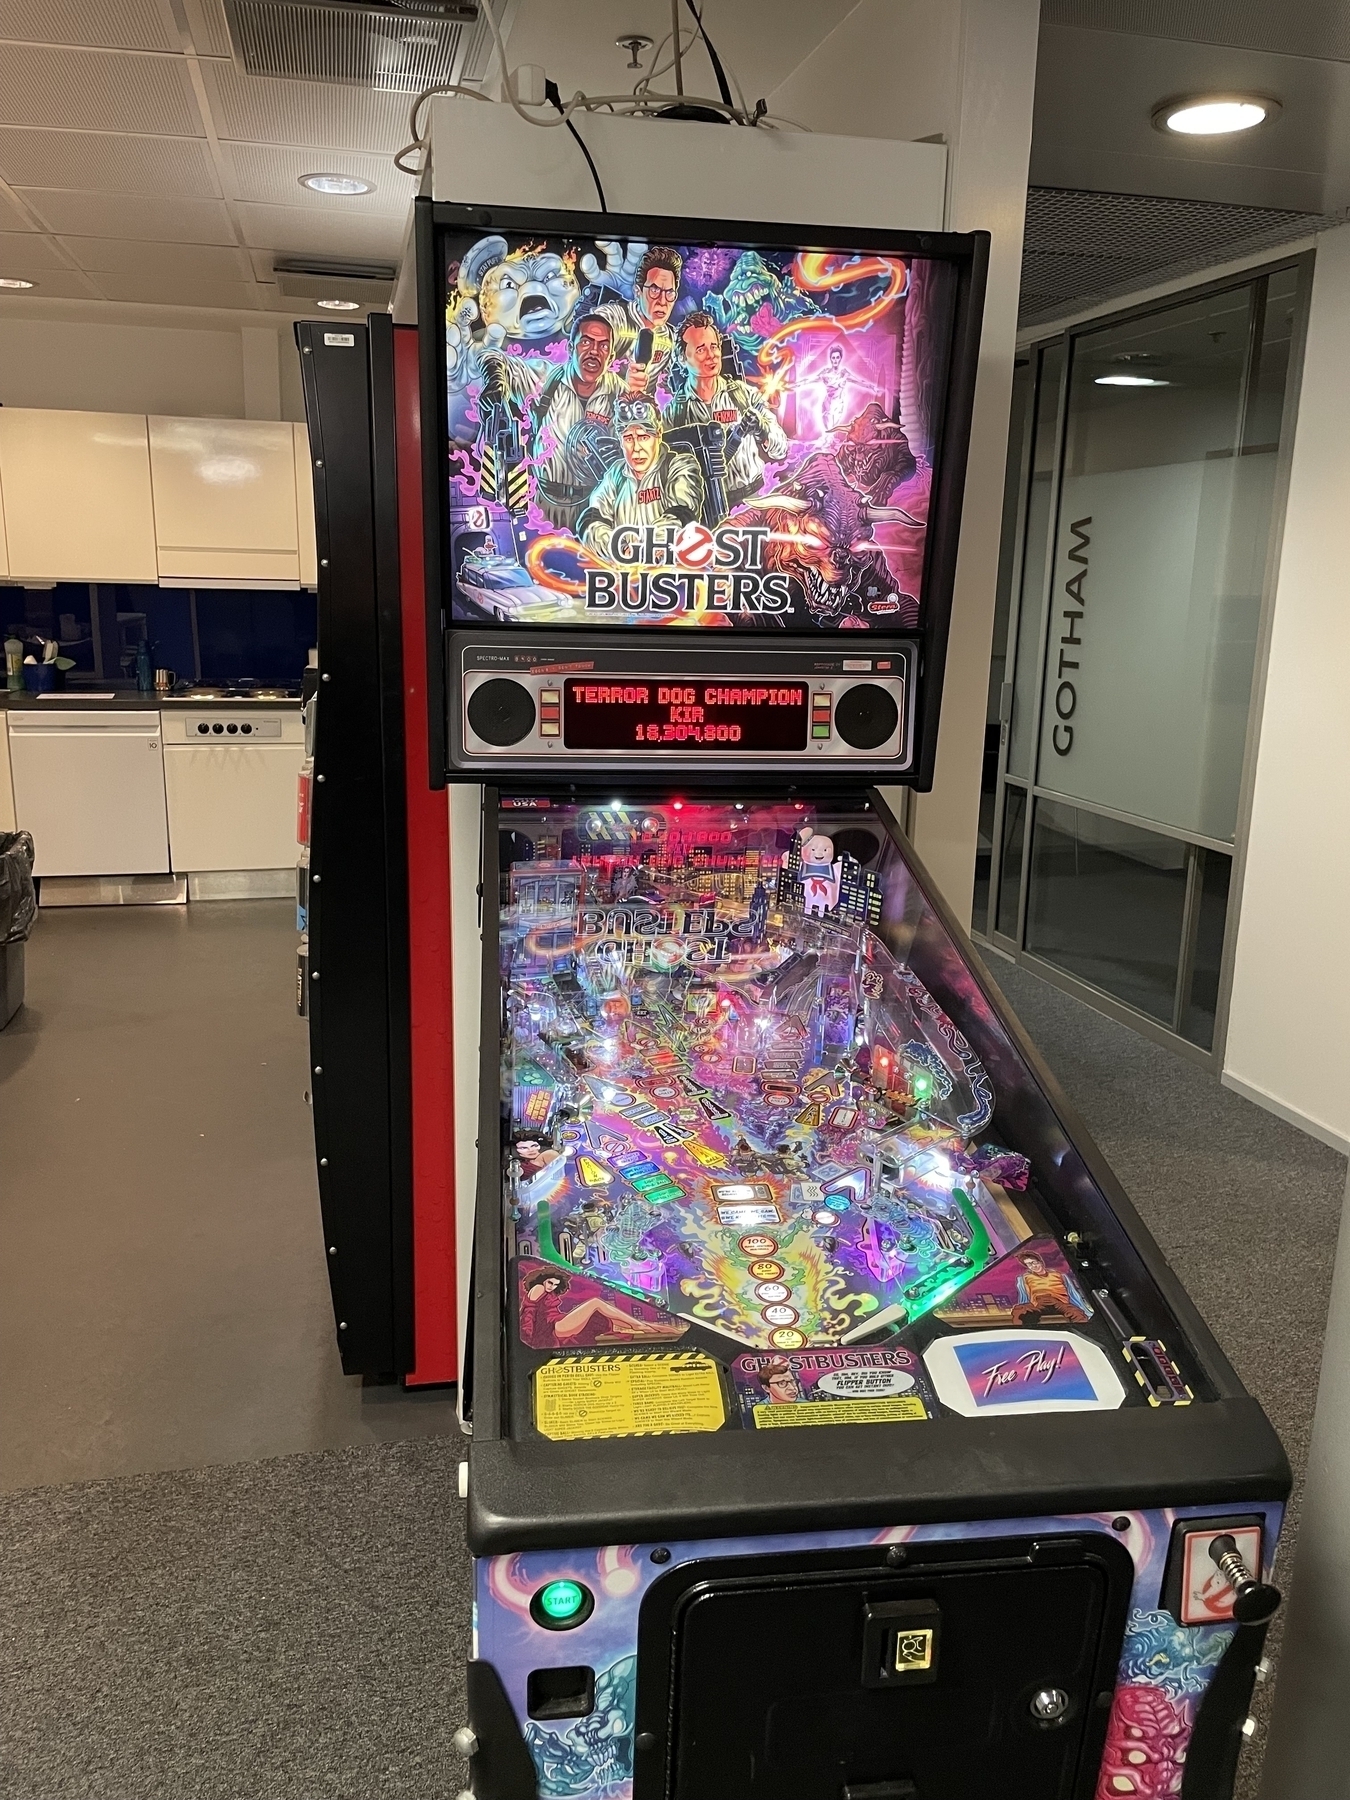 Ghostbusters pinball machine in an office